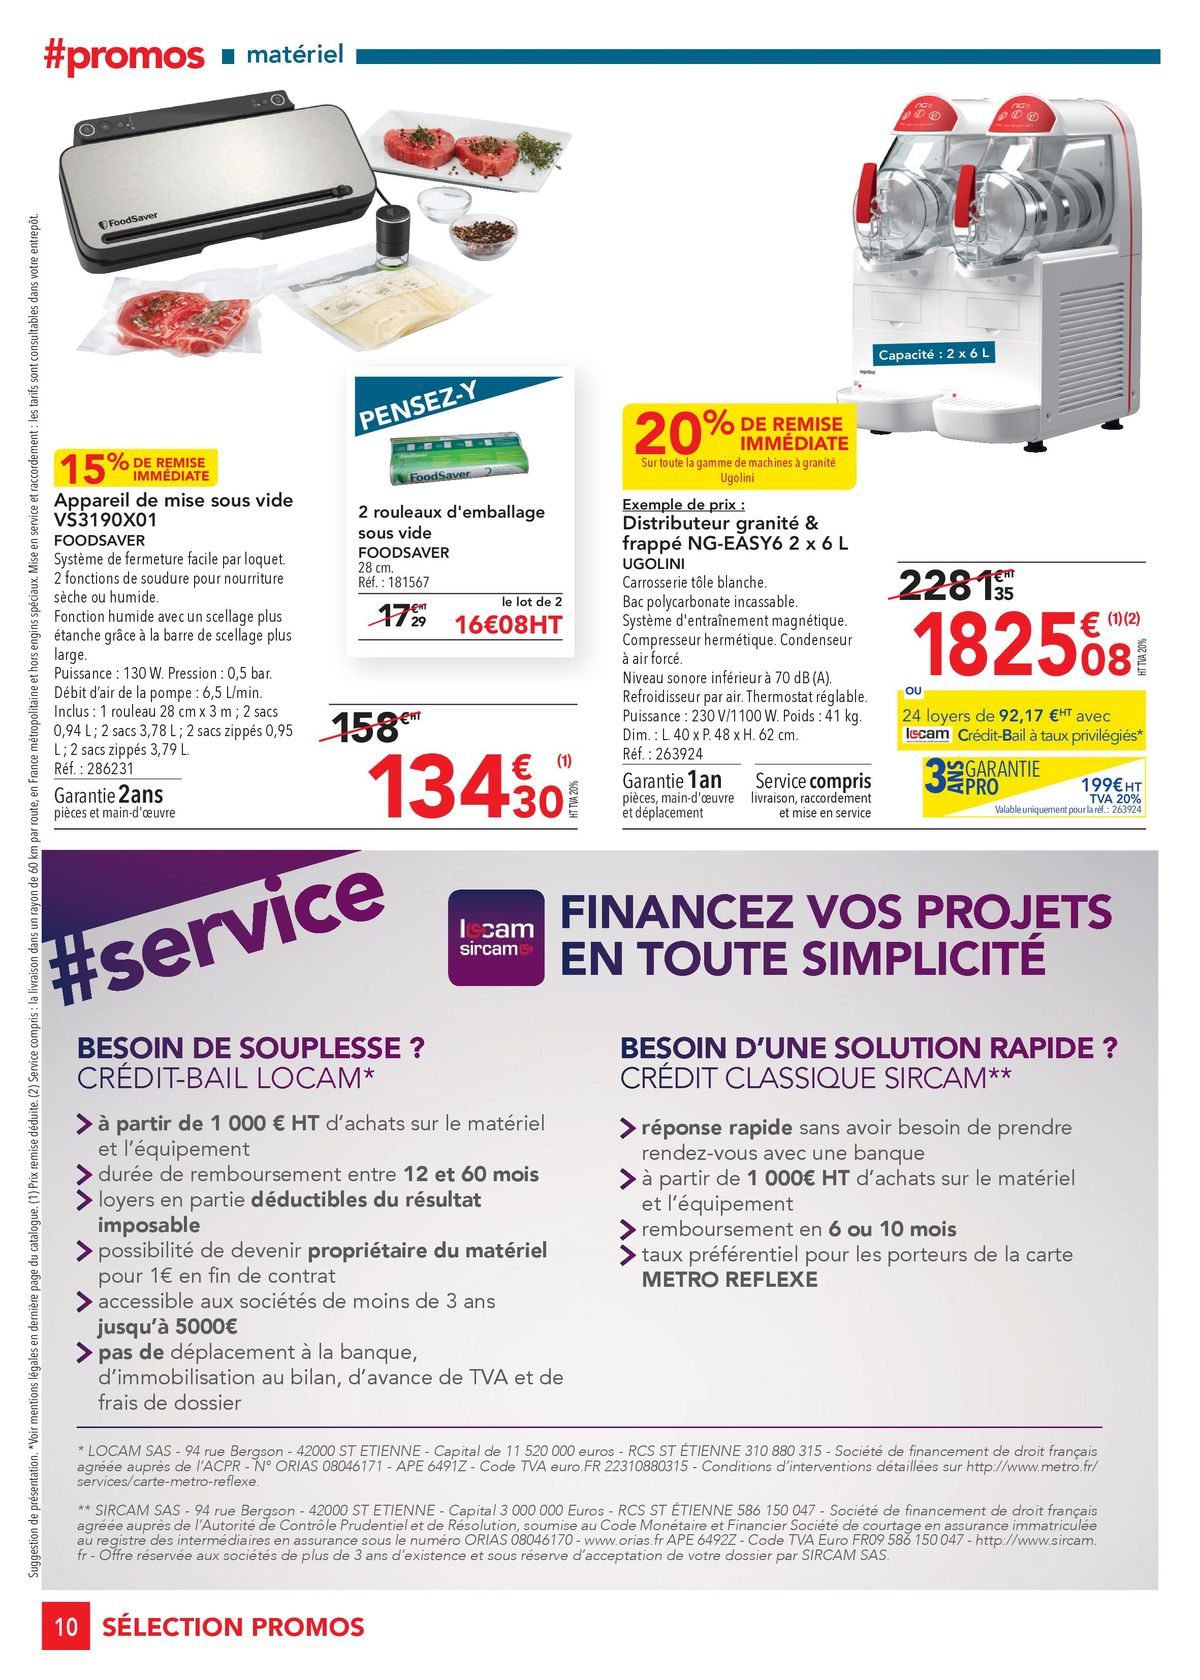 Catalogue SELECTION-PROMO-EQUIPEMENT, page 00010